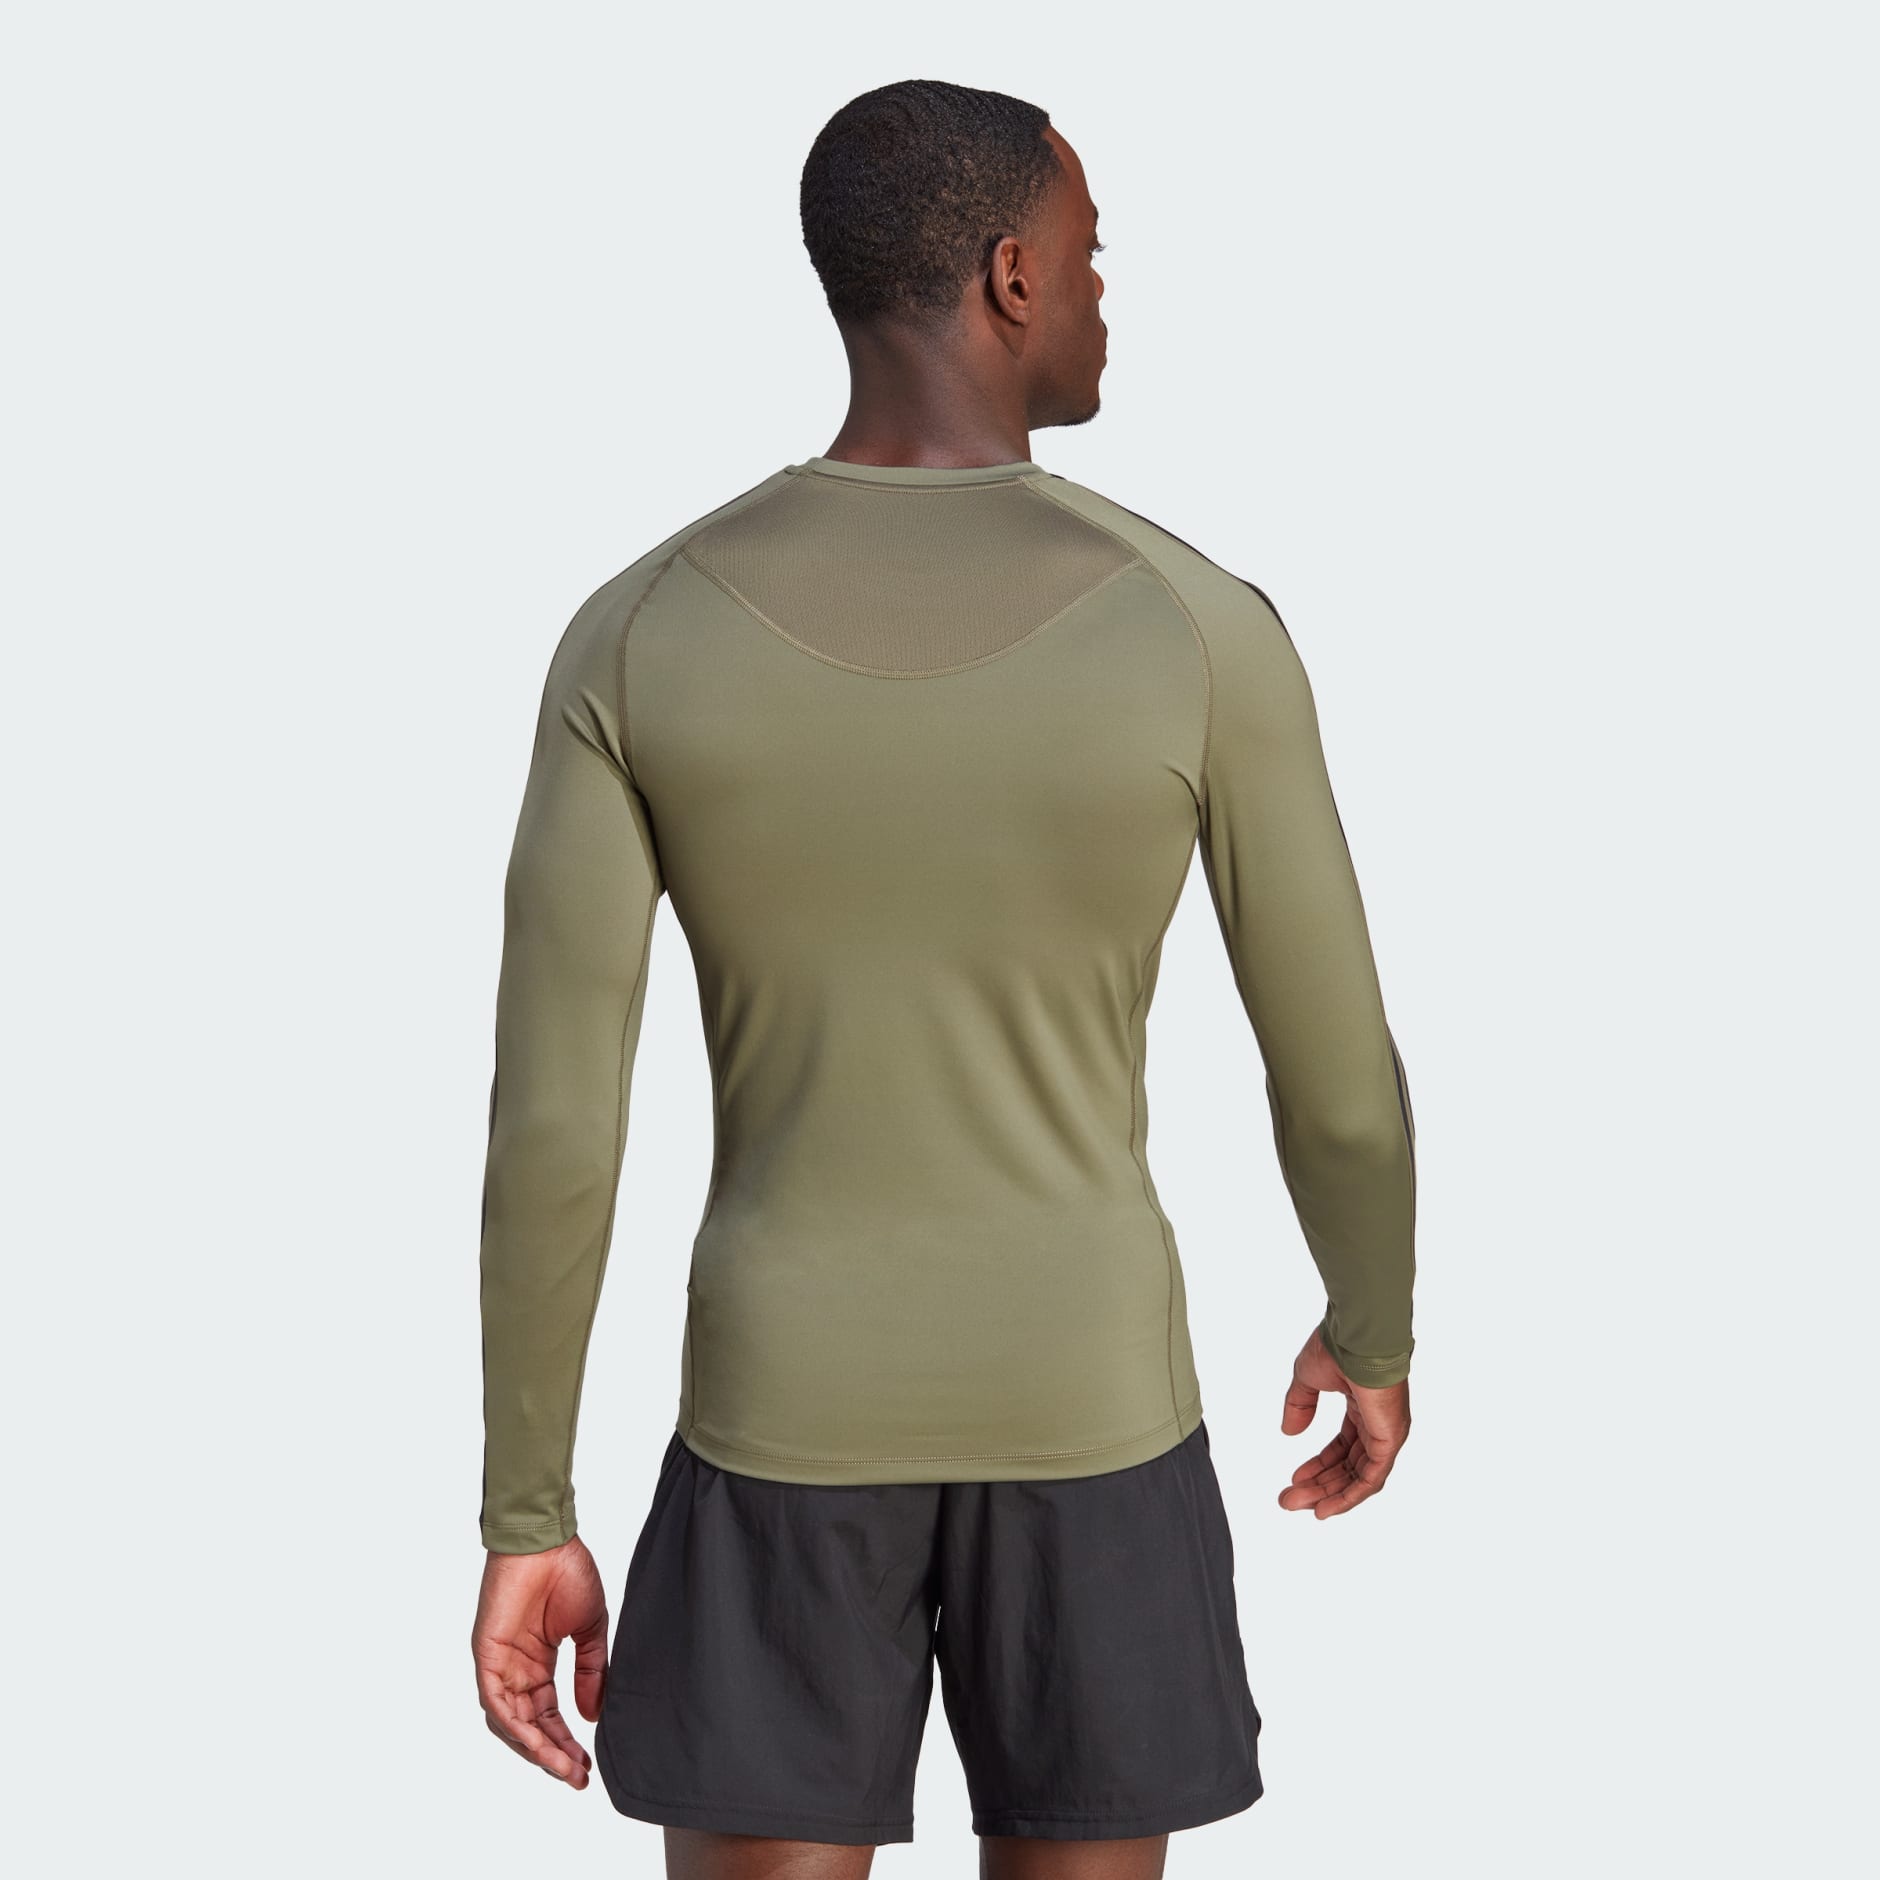 adidas Techfit Fitted Long Sleeve 3 Stripes Top - Mens Training